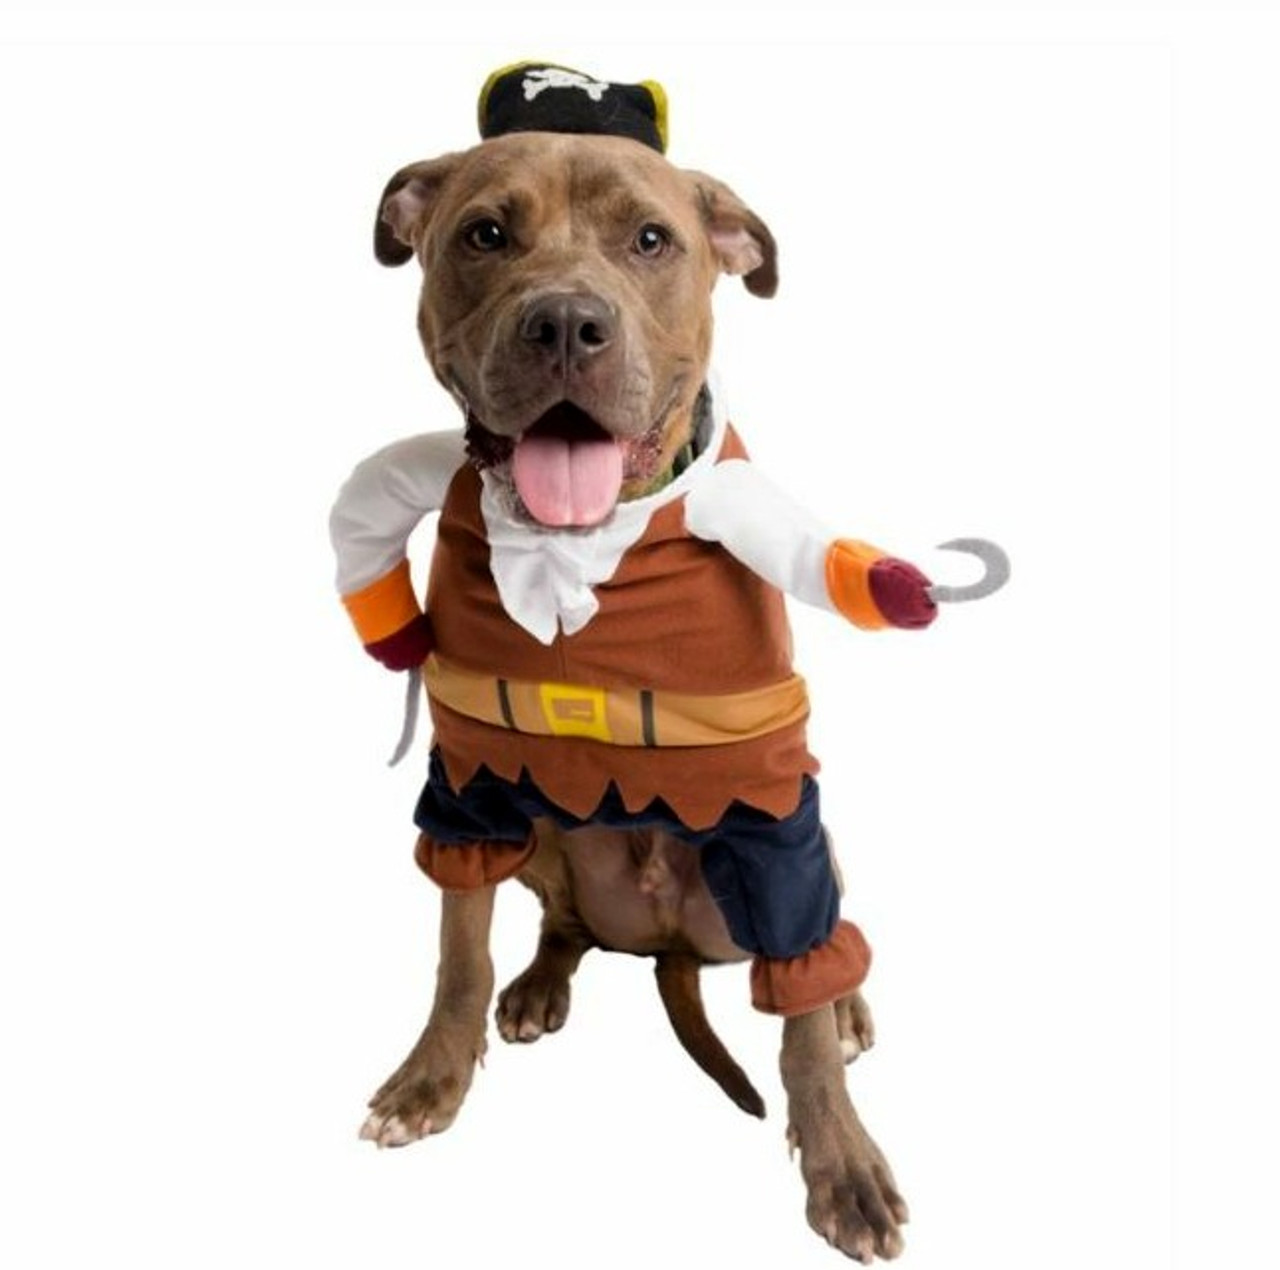 Pirate Pet Dog Costume With Arms / Hat